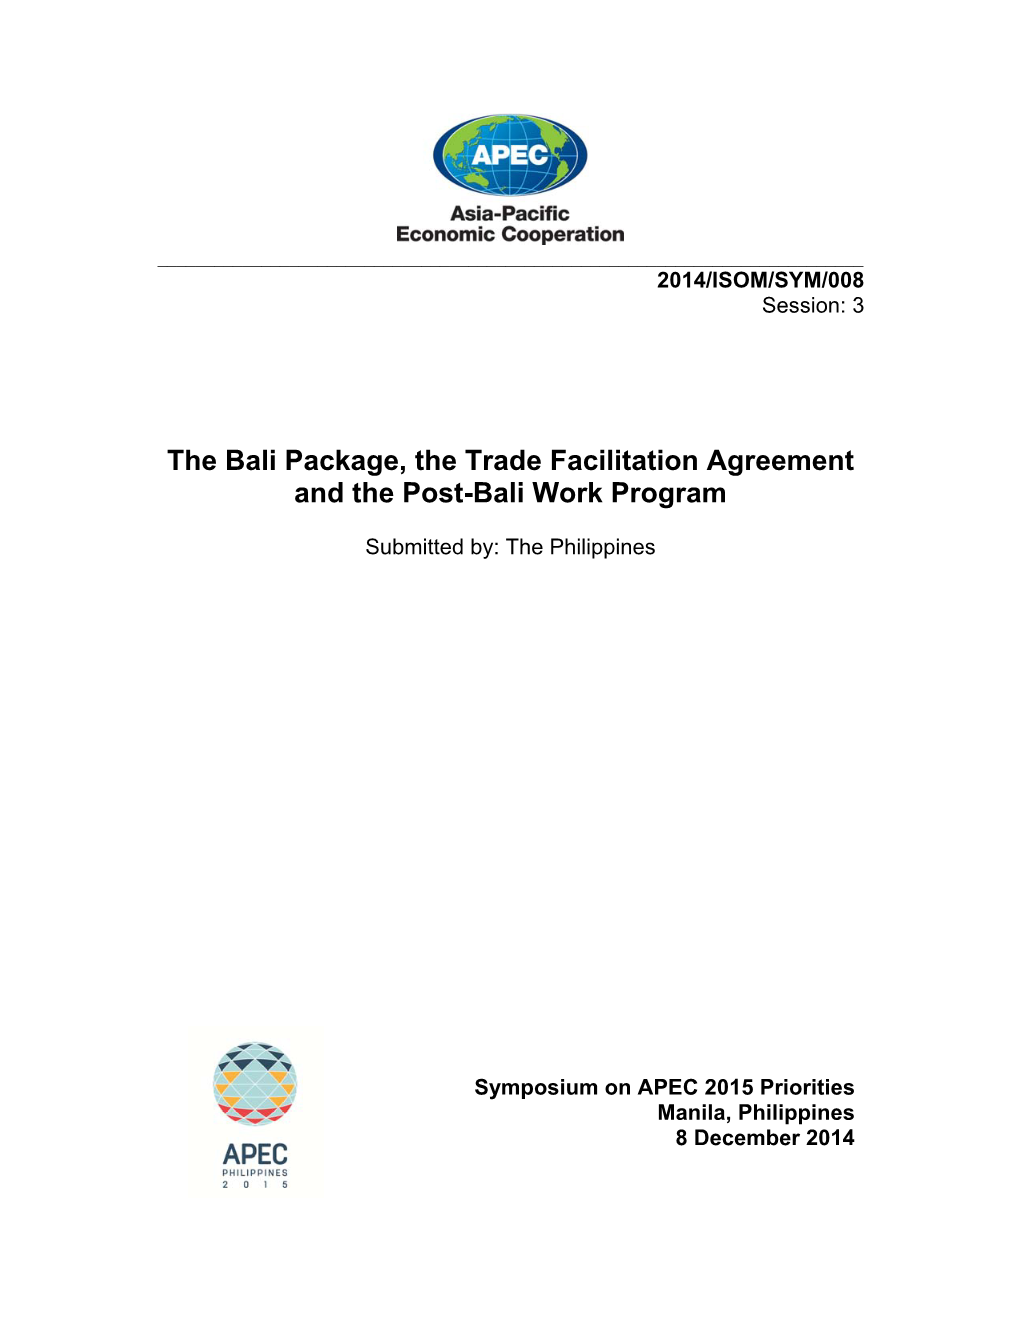 The Bali Package, the Trade Facilitation Agreement and the Post-Bali Work Program